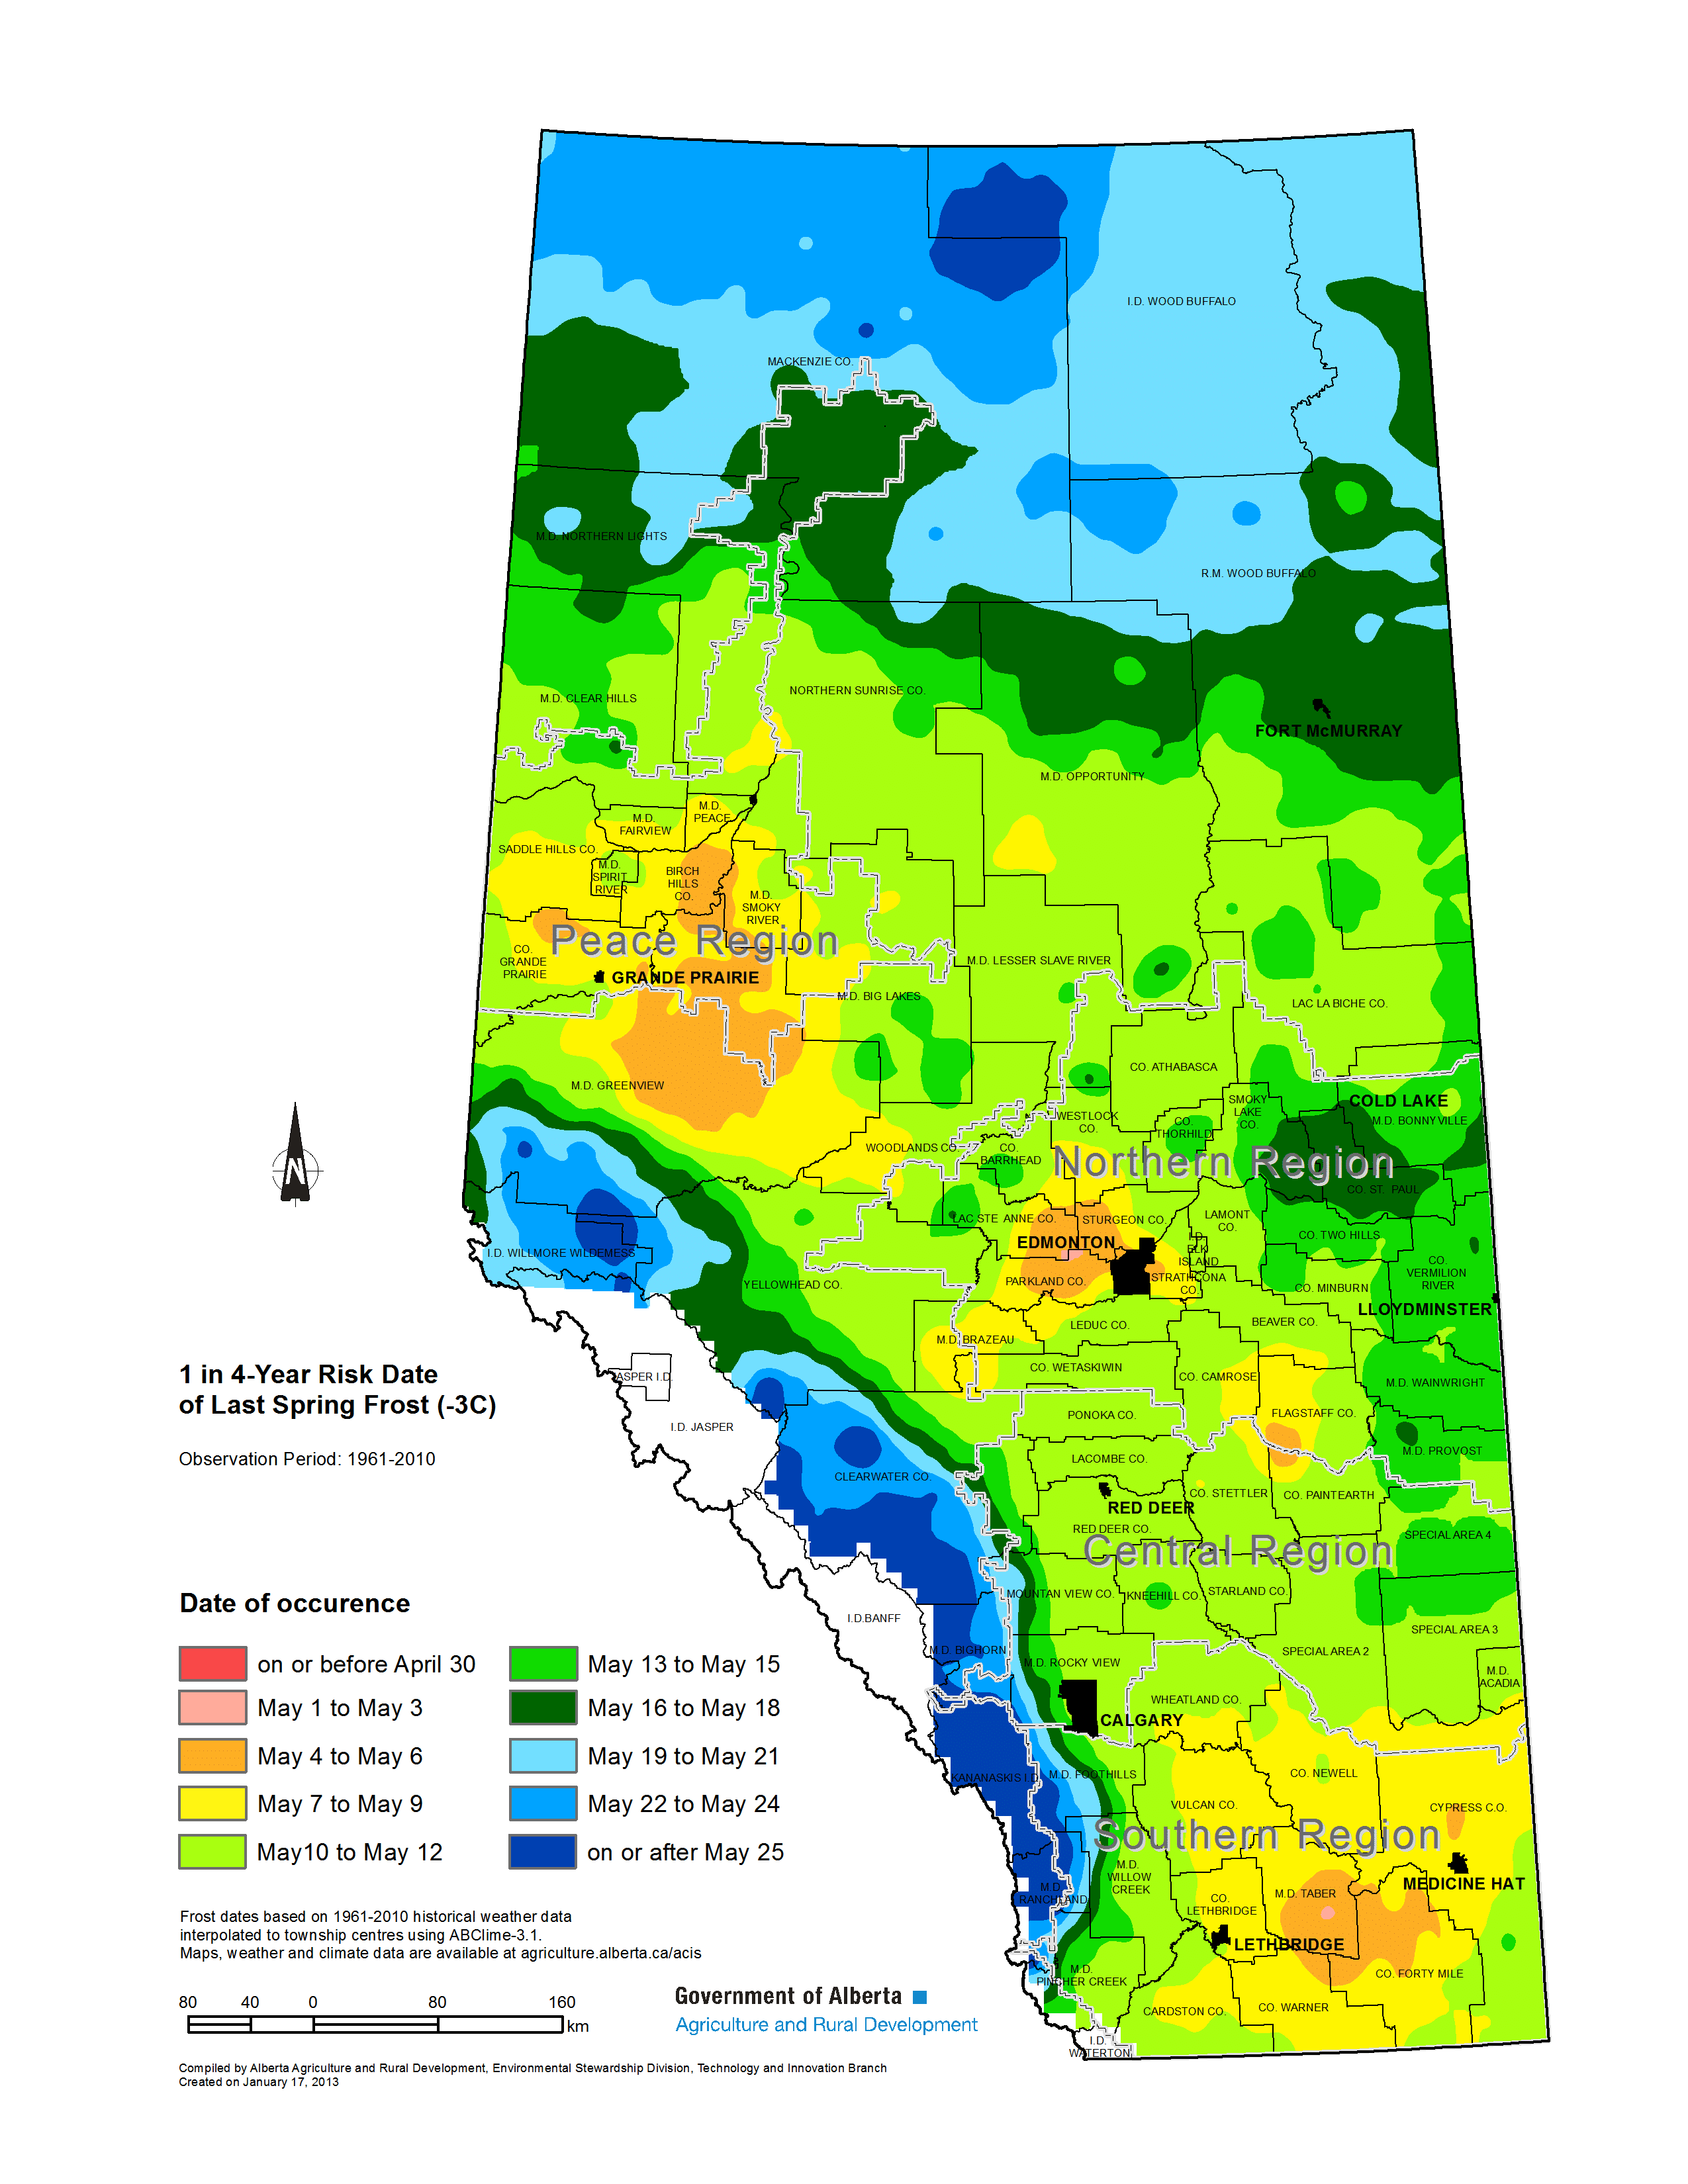 One year in four (25% probability) the last -3°C frost in Alberta will occur on or after these dates. Seeding based on these dates is lower risk that seeding based on the average last frost date.